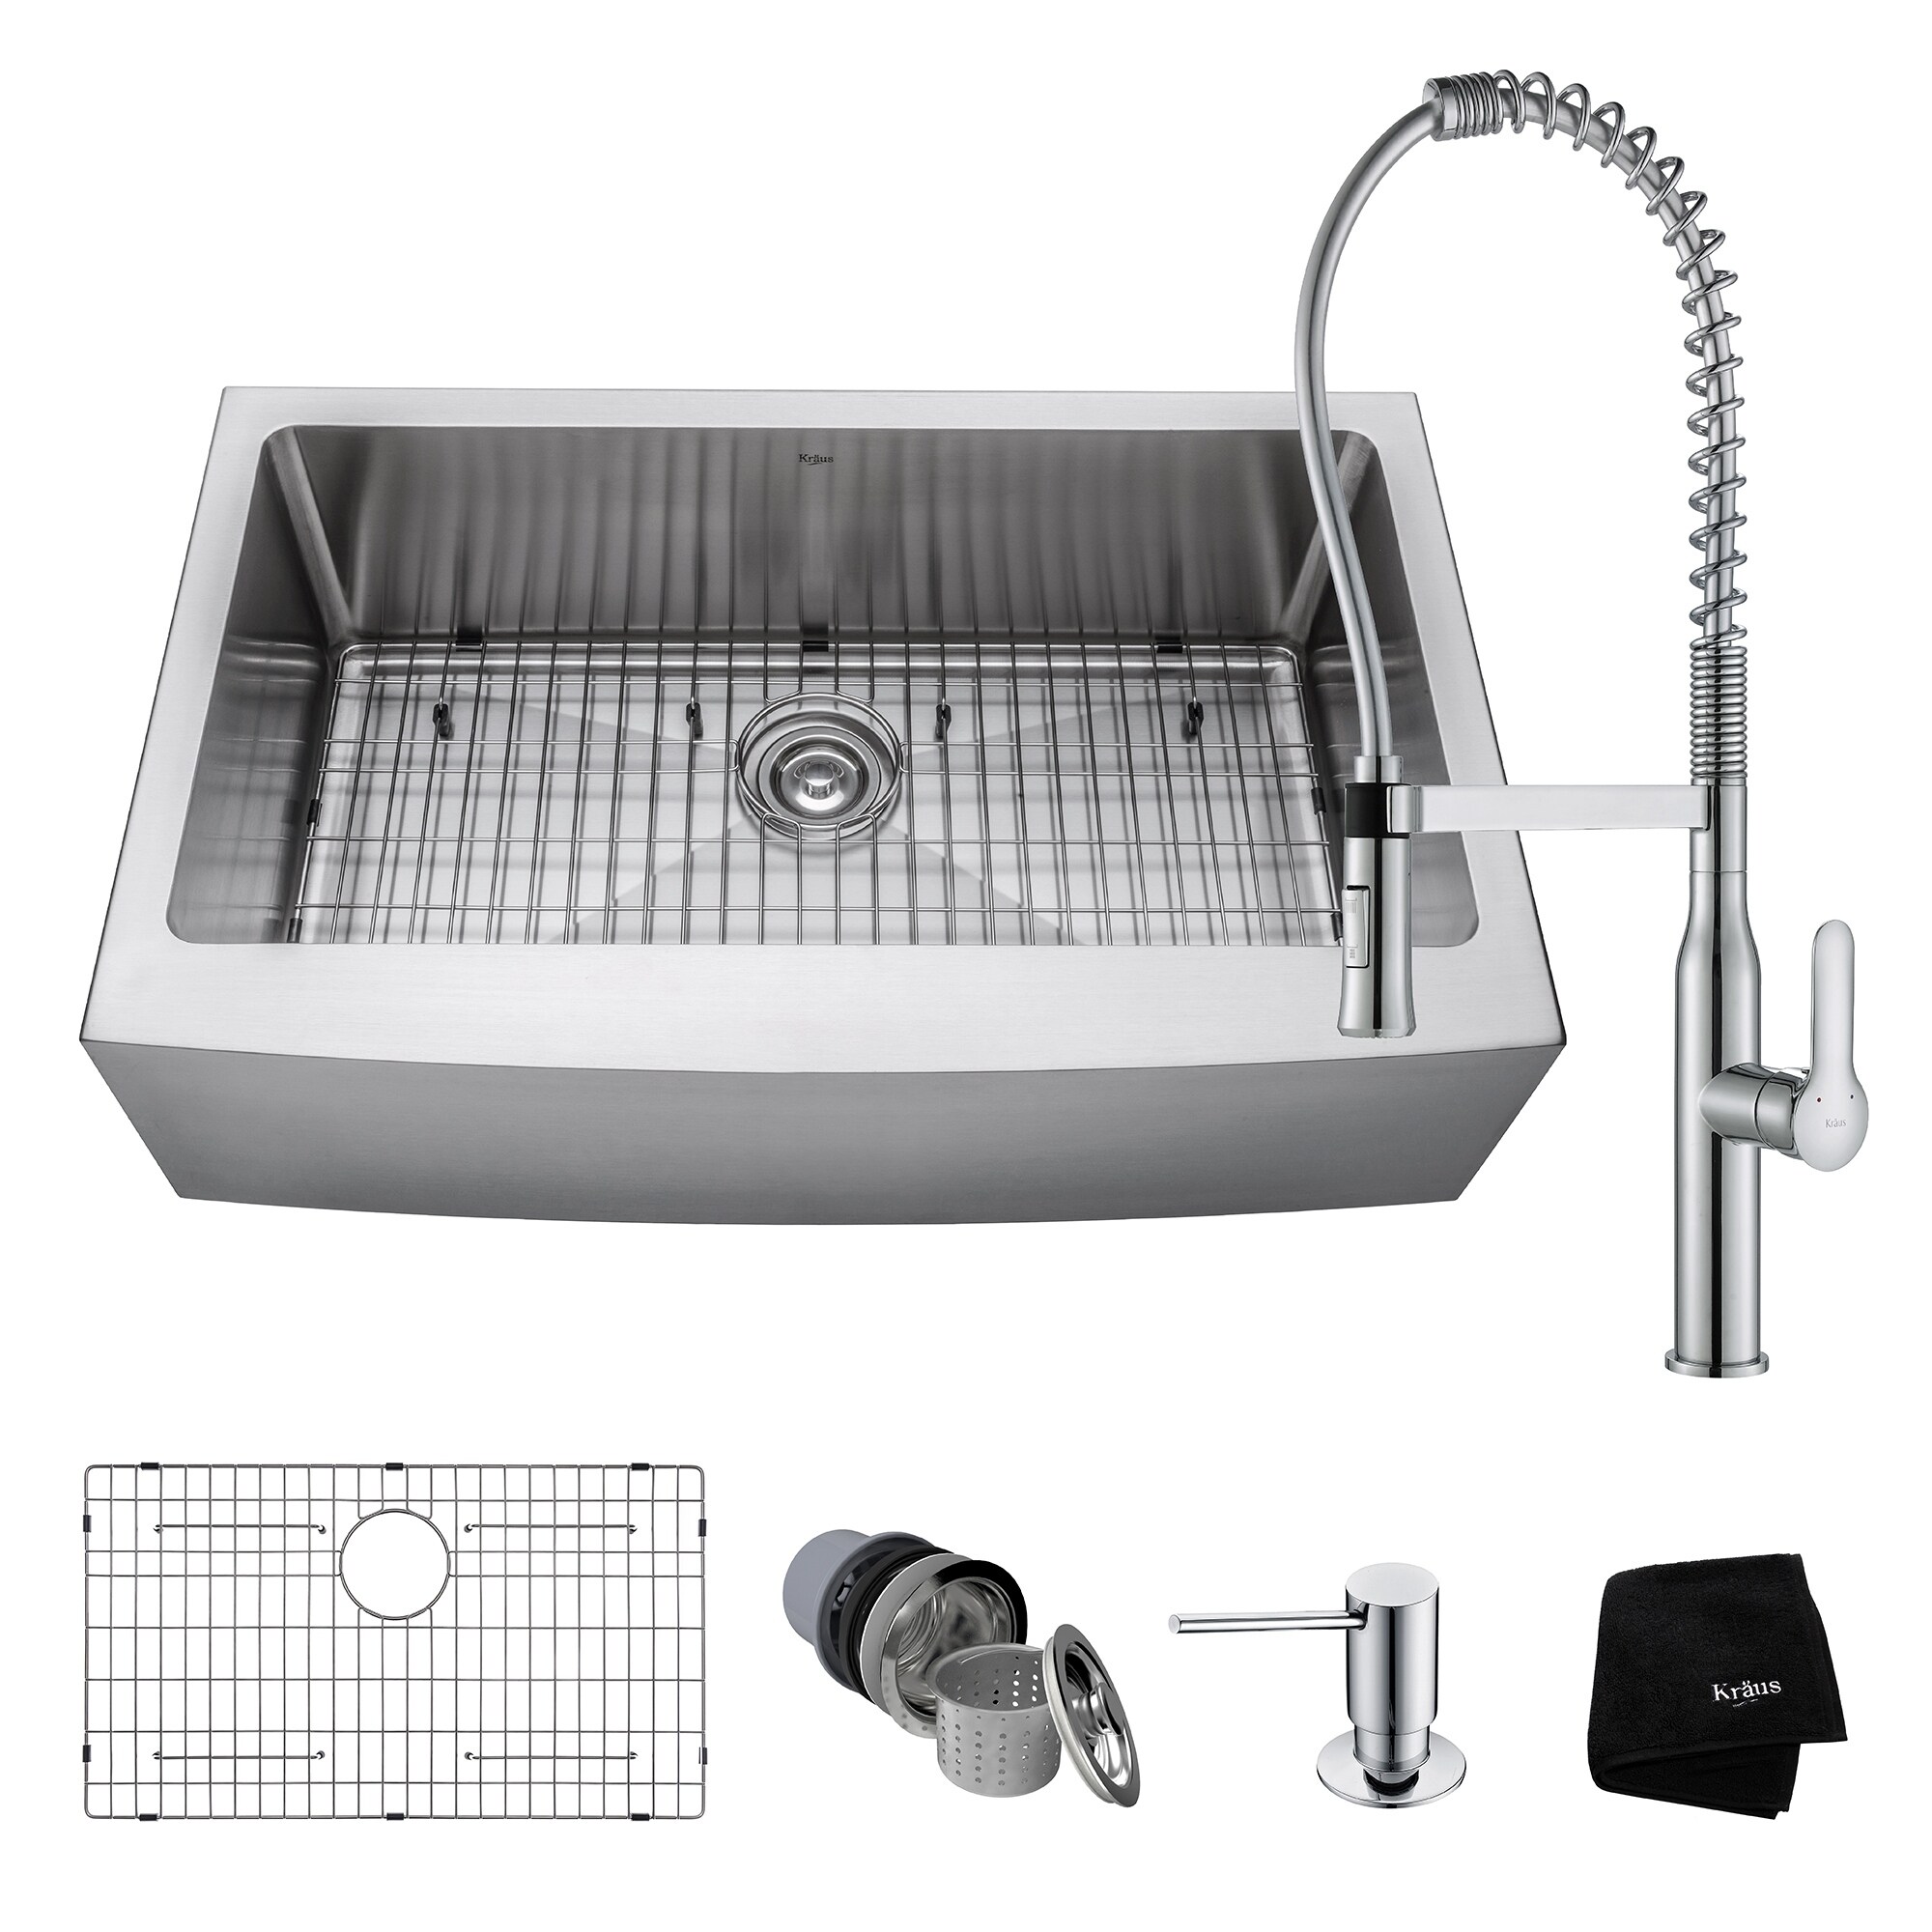 Kraus 33 Inch Farmhouse Single Bowl Stainless Steel Kitchen Sink Kpf 1640 Nola Commercial Pull Down Faucet Dispenser